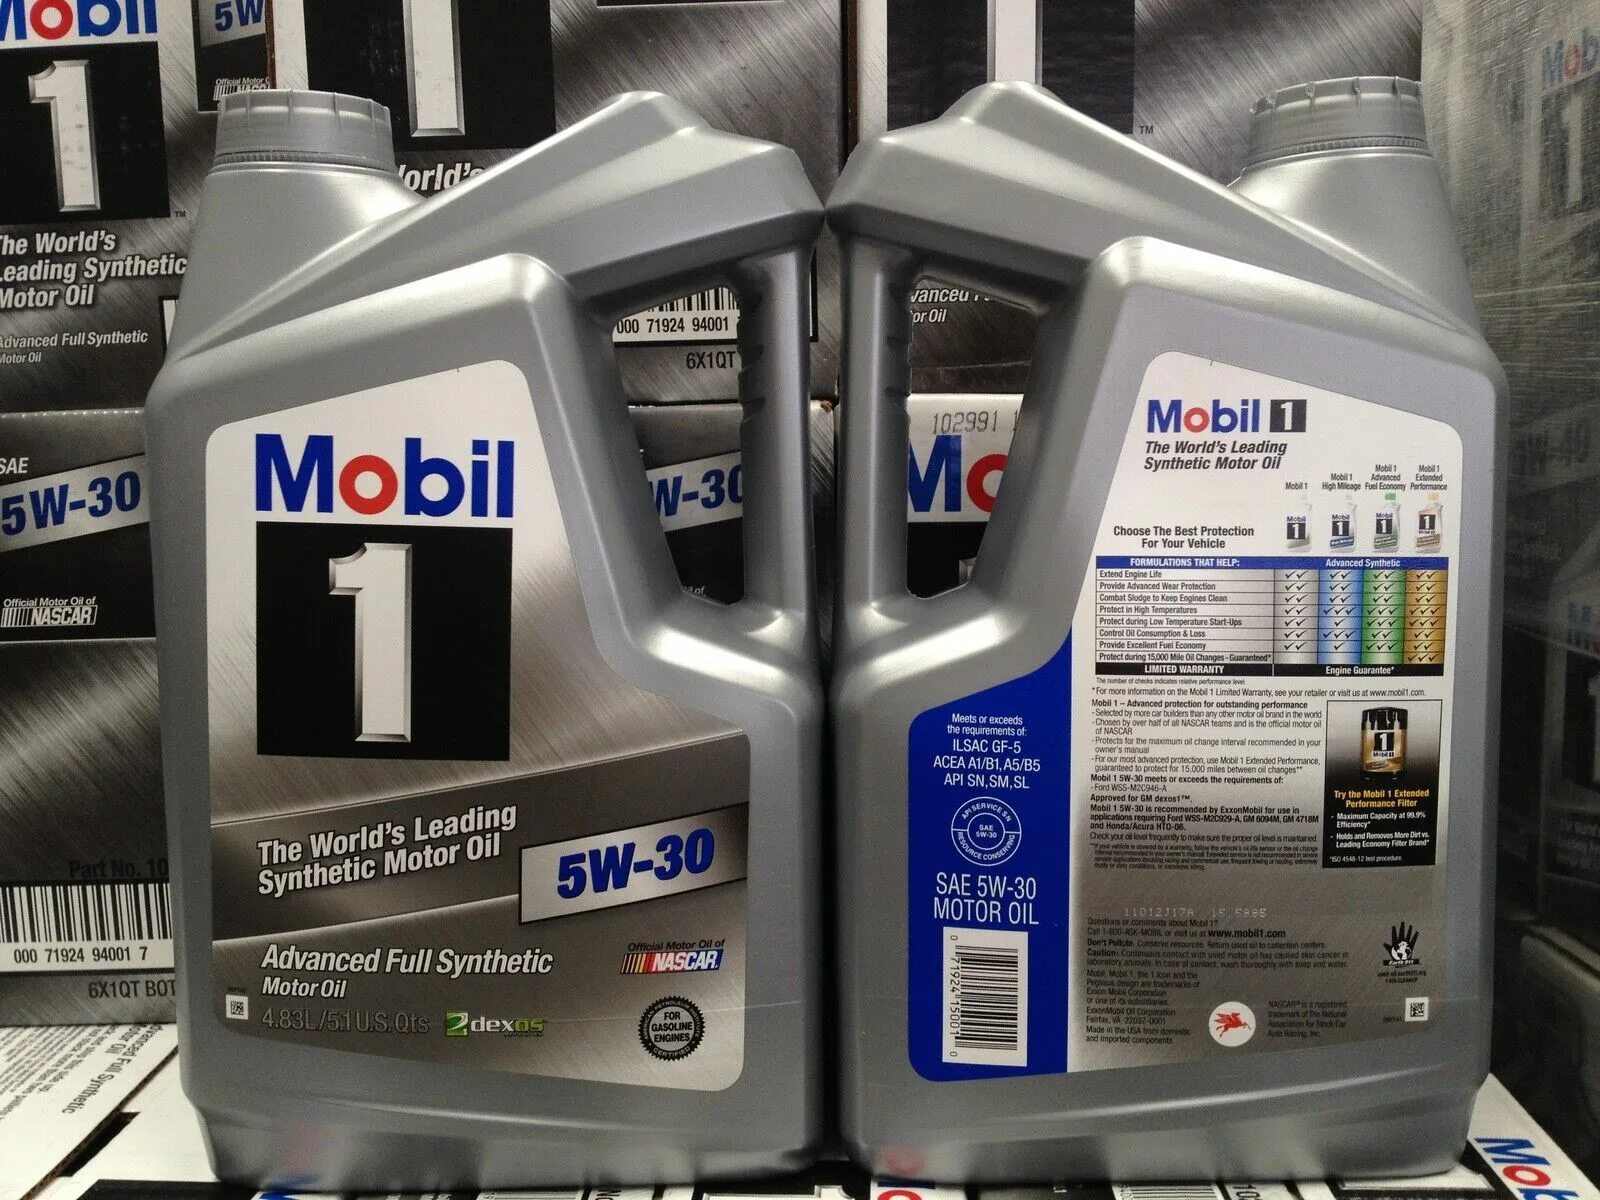 Mobil 1 x1 масло. Mobil 1 5w30 4.73. Mobil 1 Advanced Full Synthetic 5w30. Mobil 1 x1 Oil, Synthetic engine масло моторное [ 102991 ]. Мобил 5w30 Advanced Full Synthetic.